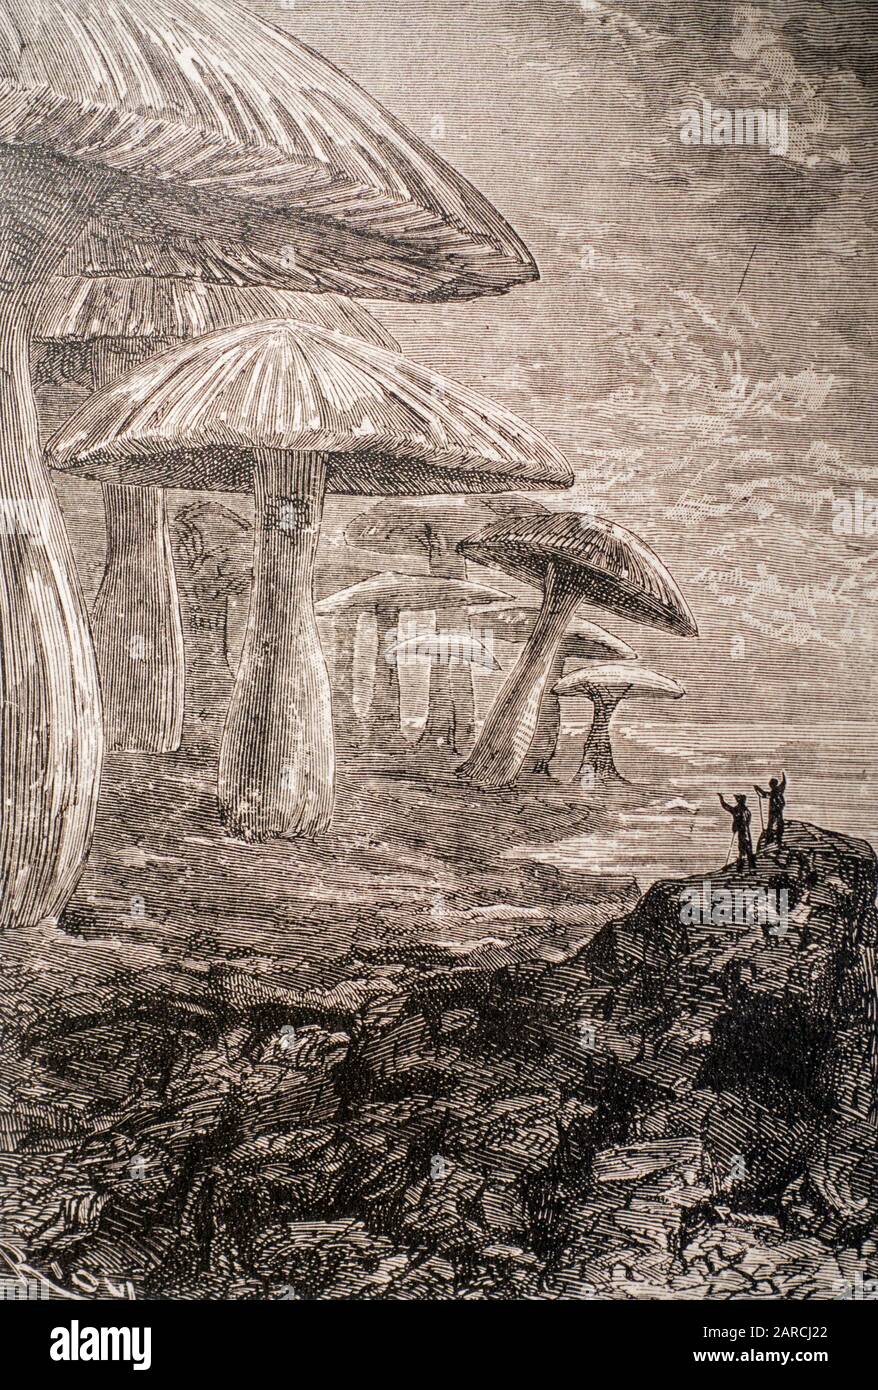 1864 book illustration showing giant mushrooms from science fiction novel Journey to the Center of the Earth by French writer / novelist Jules Verne Stock Photo